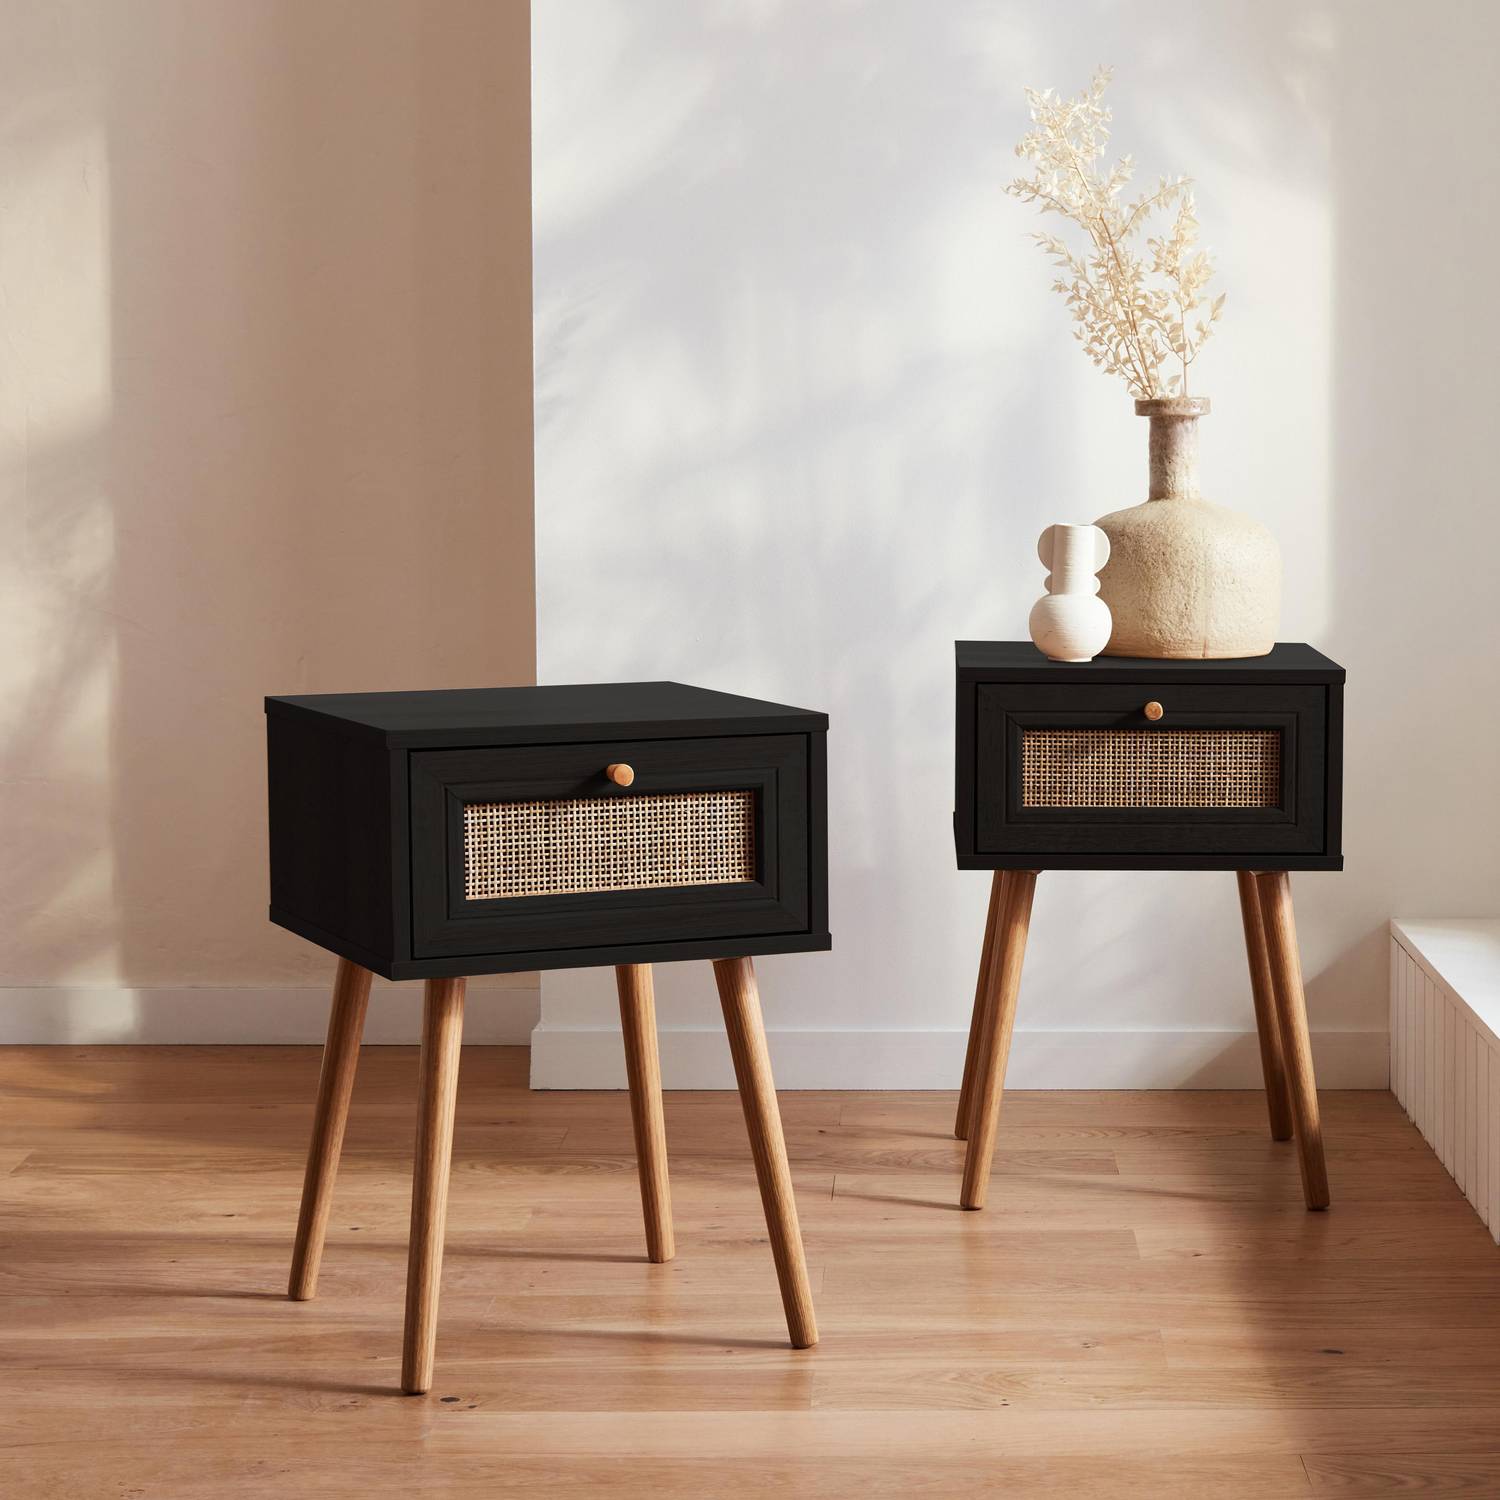 Set of 2 black wood and cane effect bedside tables with 1 drawer Photo1